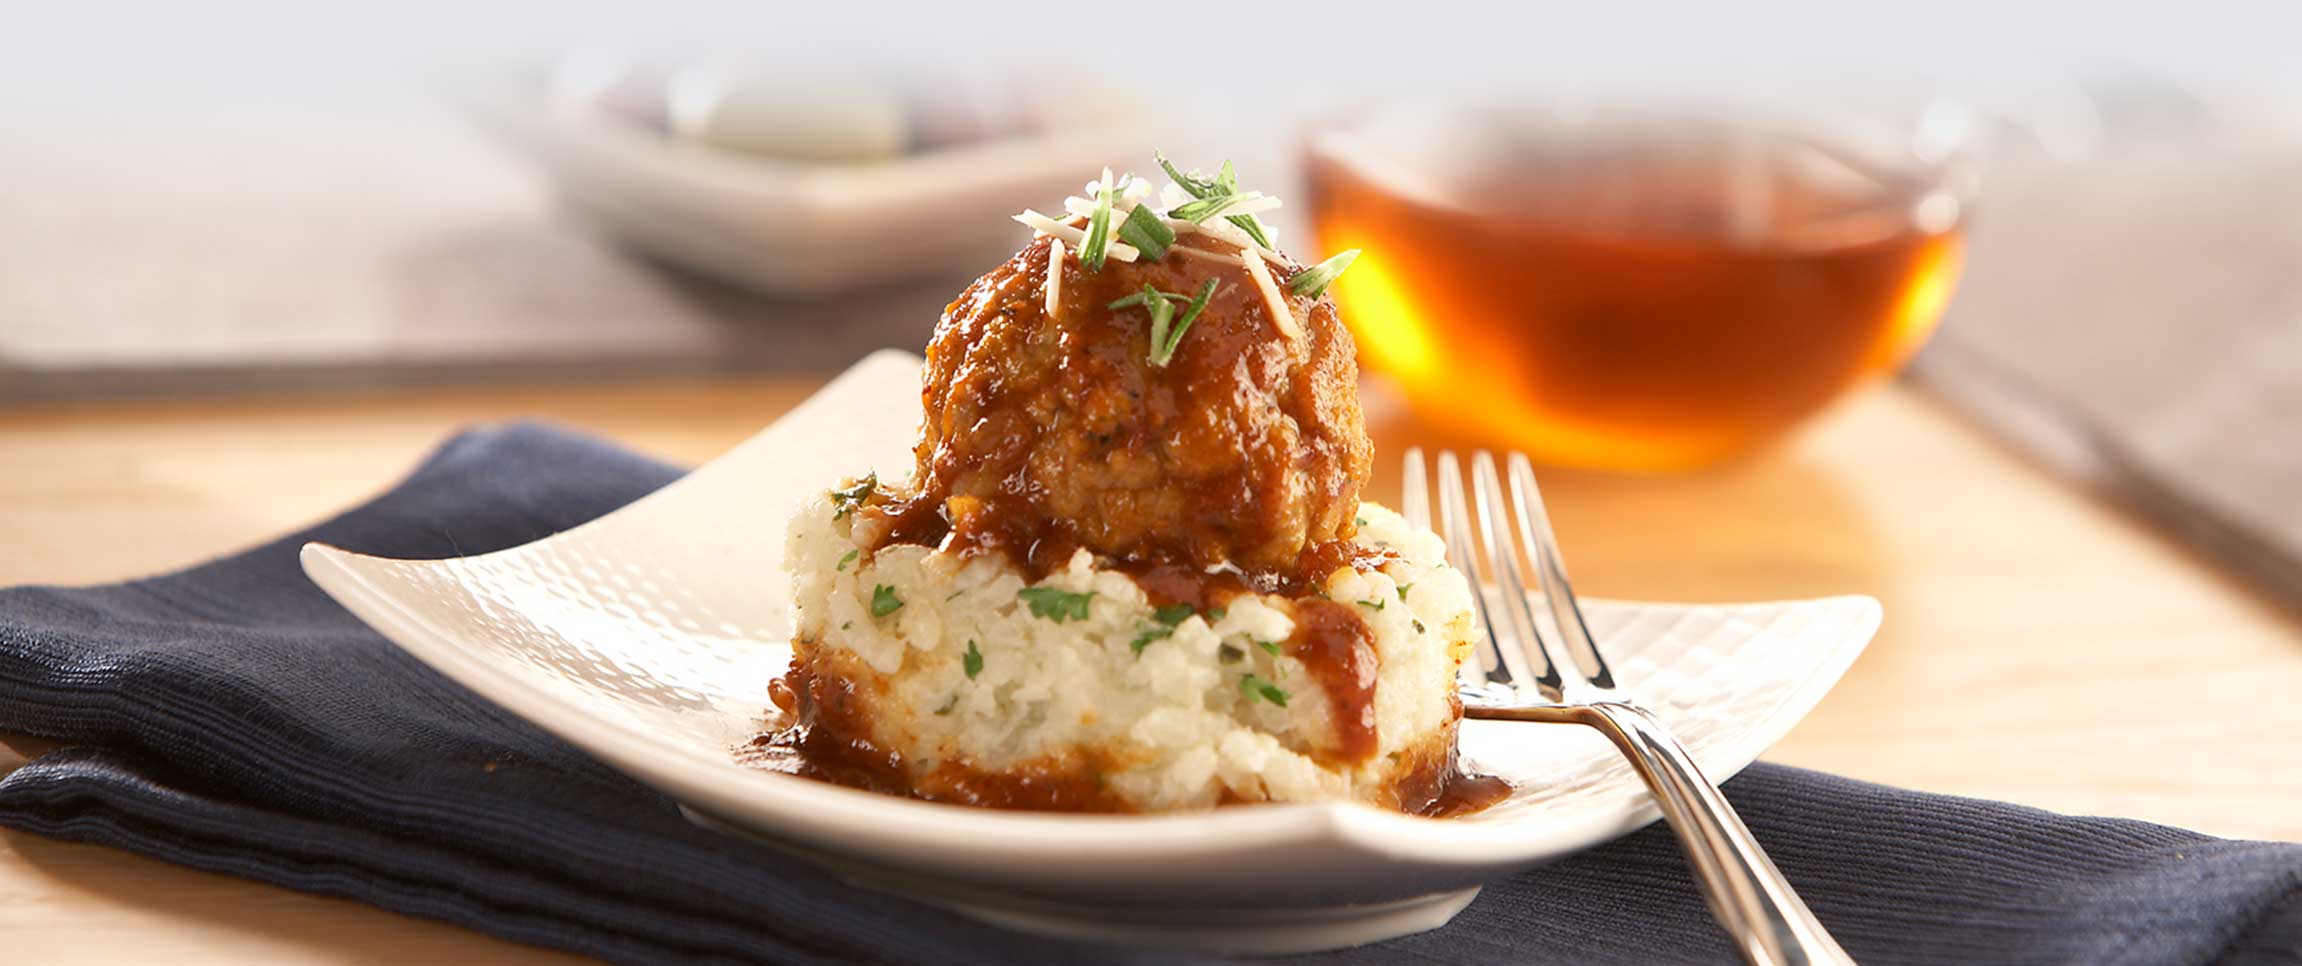 Roma Gourmet Beef & Pork Meatballs with Risotto 